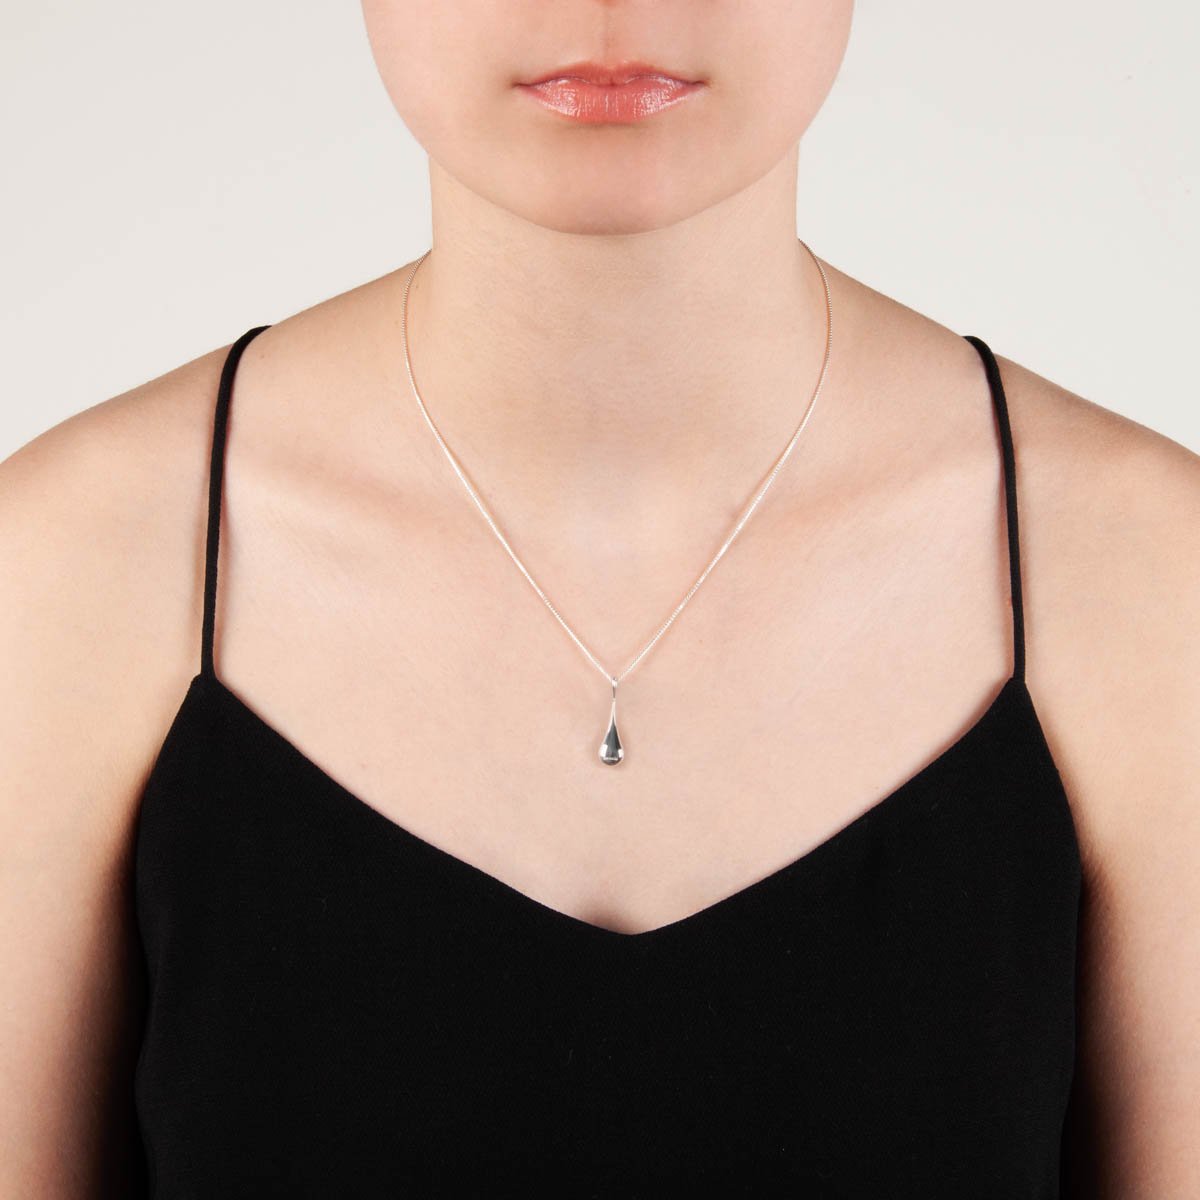 Najo - My Silent Tears Necklace